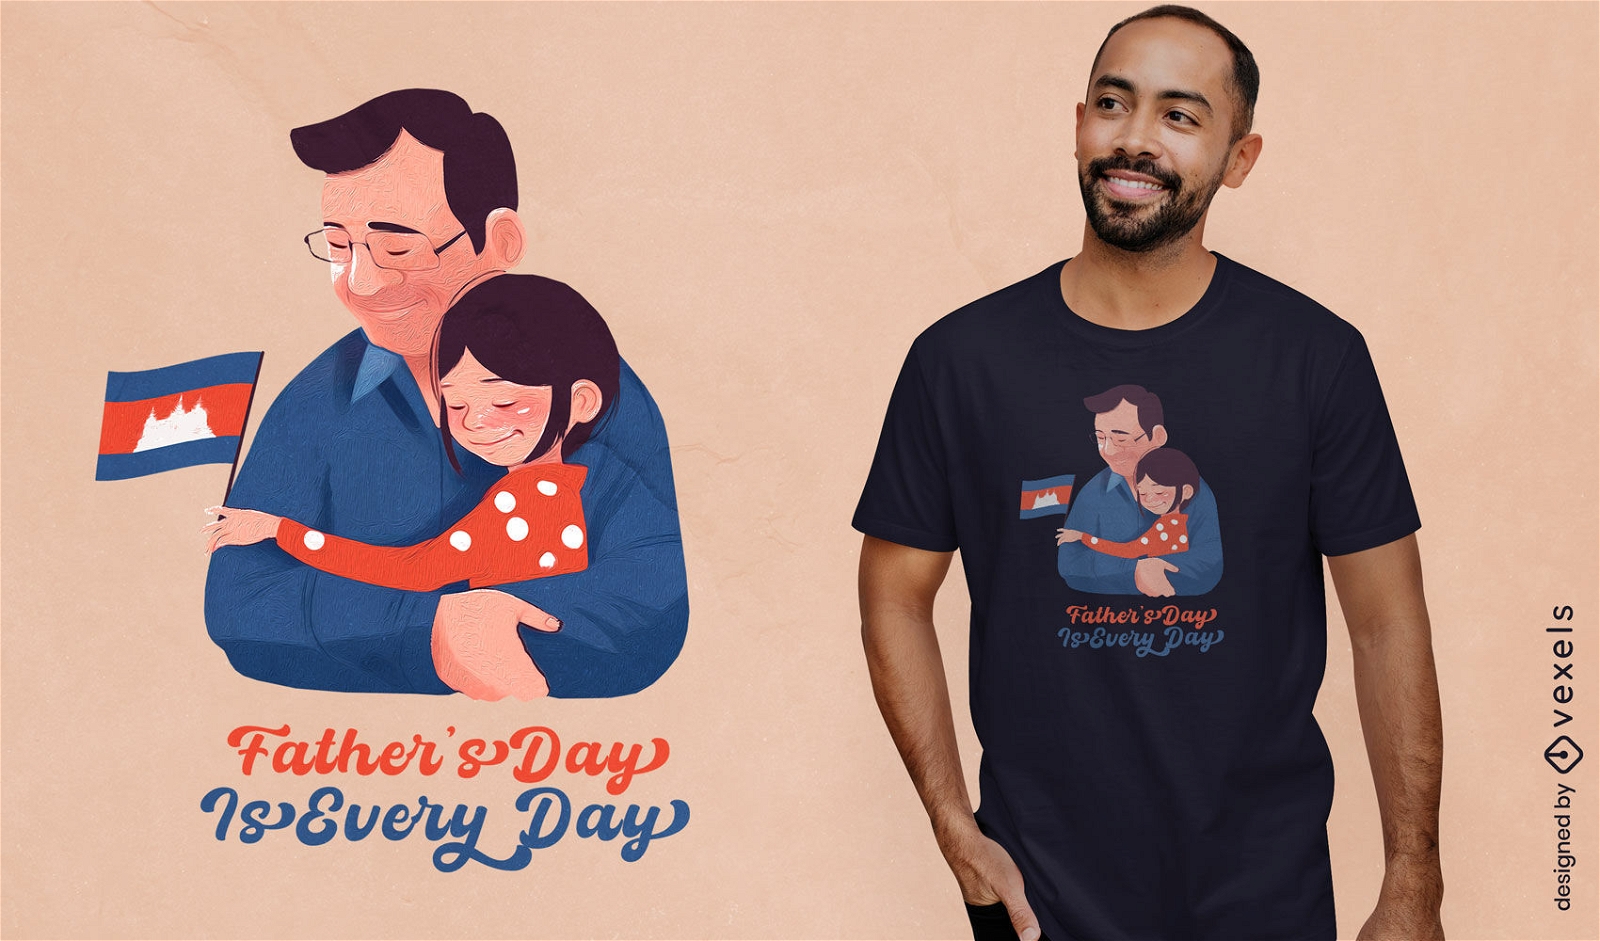 Cambodian Father's Day t-shirt design